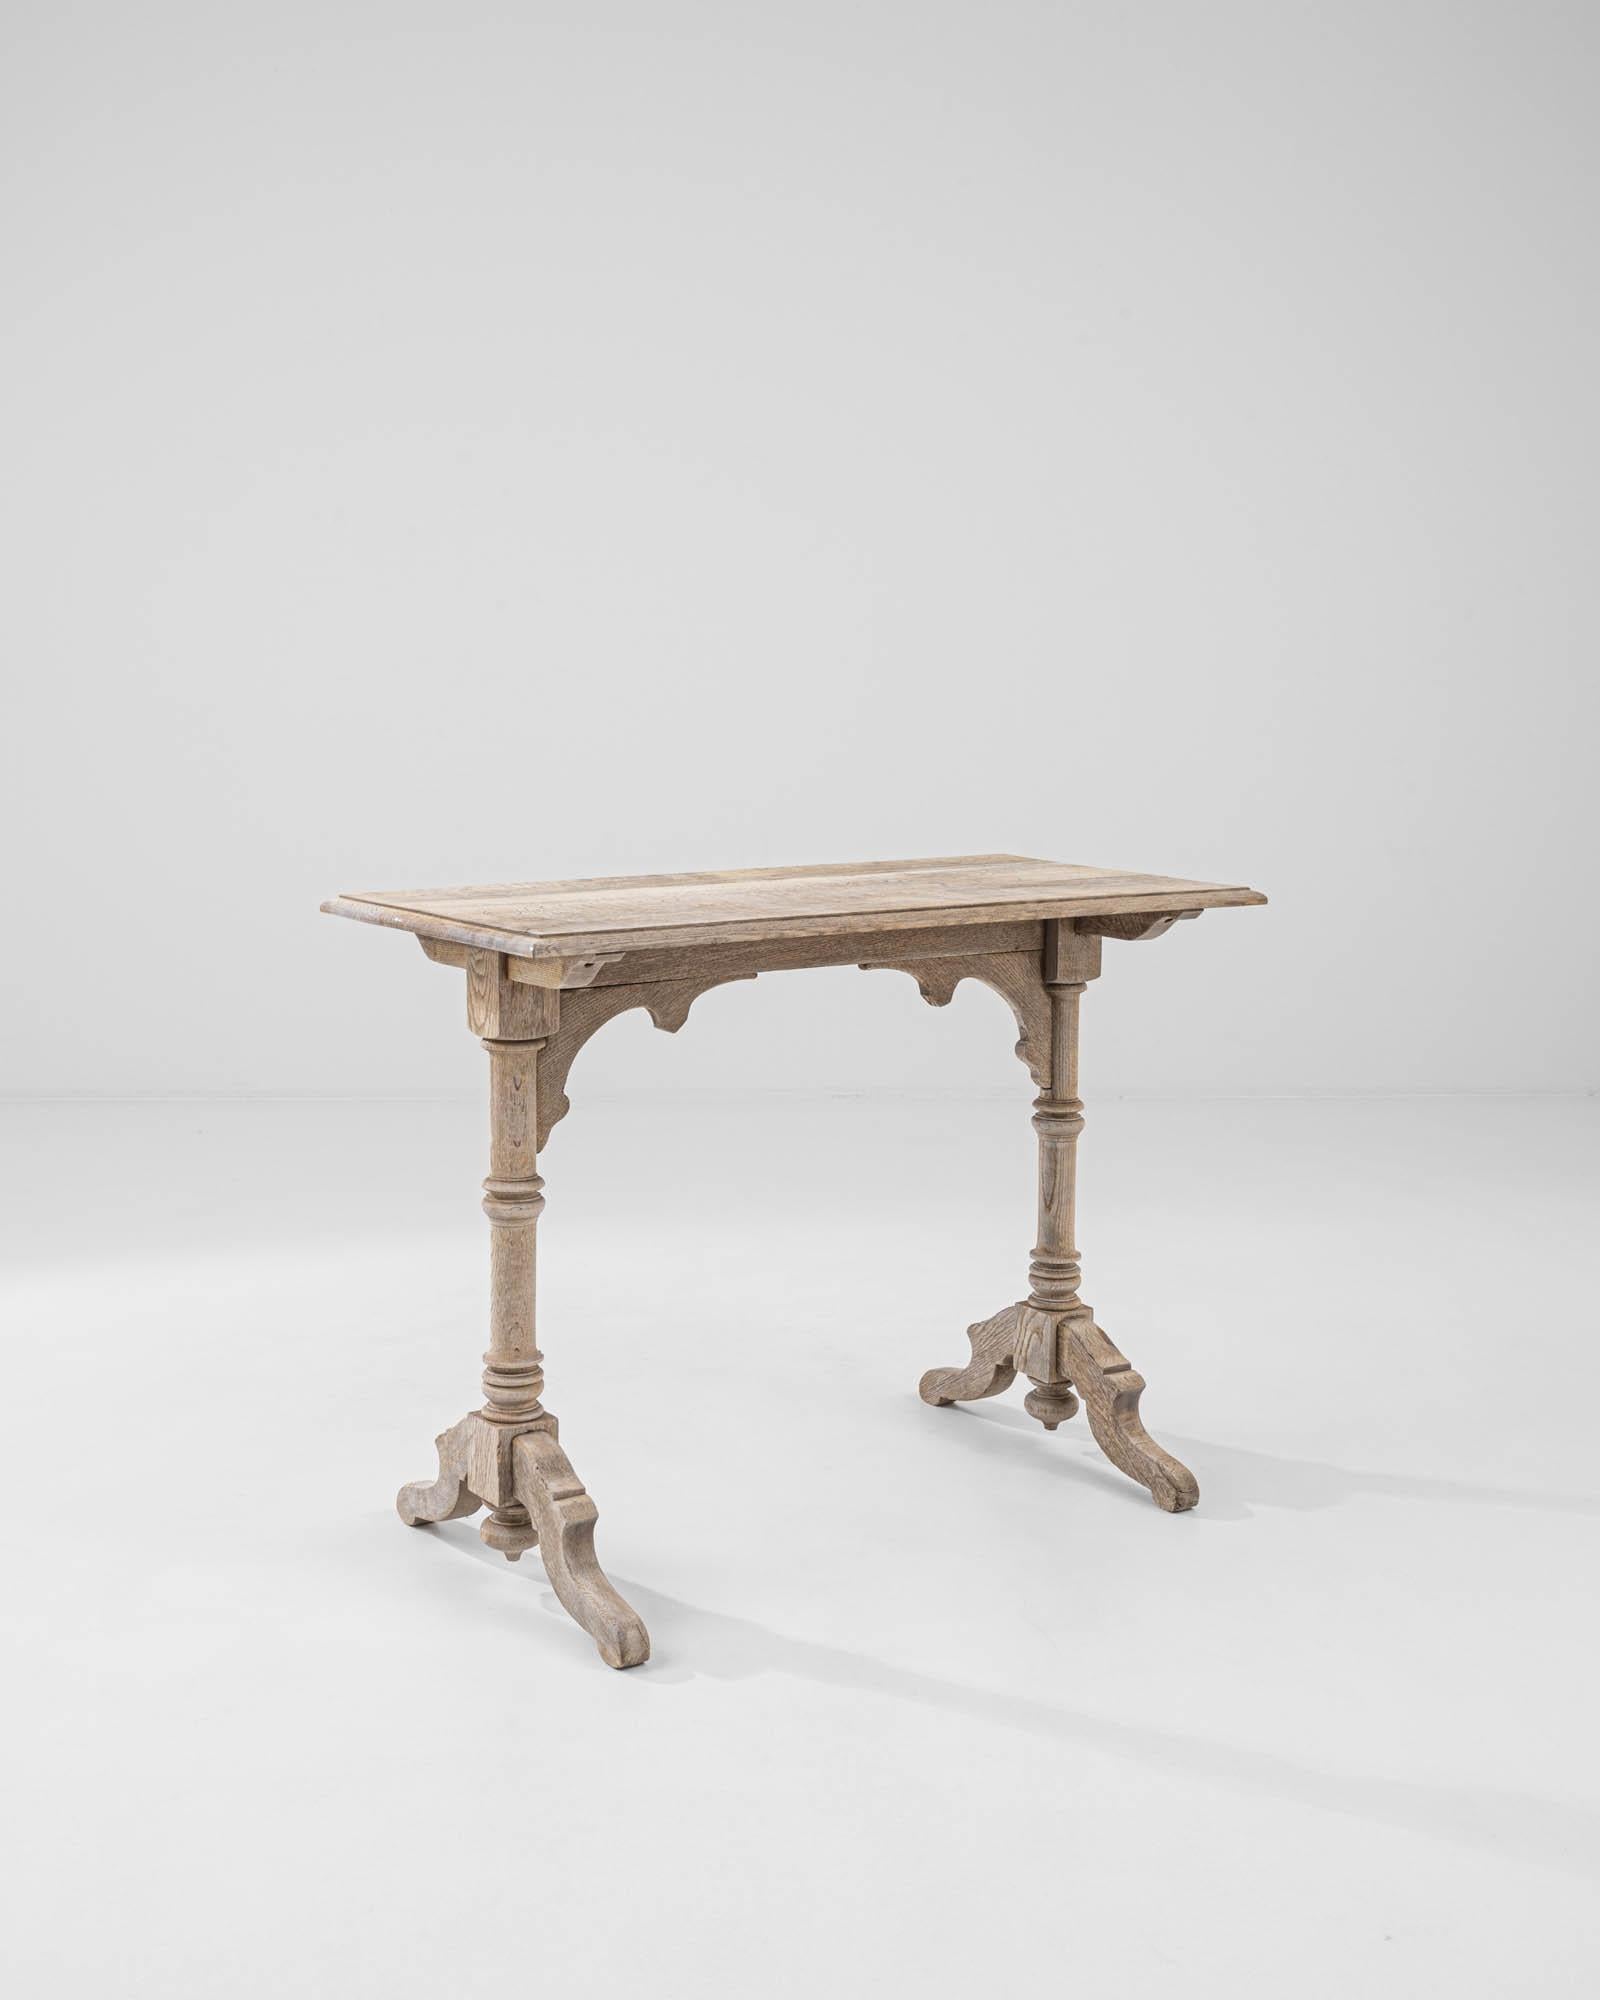 A wooden table from 1900s France. This small trestle table is composed of two legs with arching diagonal feet, carved with a rich attention to detail. The compact form is adapted to the necessities of bustling cafés and brasseries. The brightness of